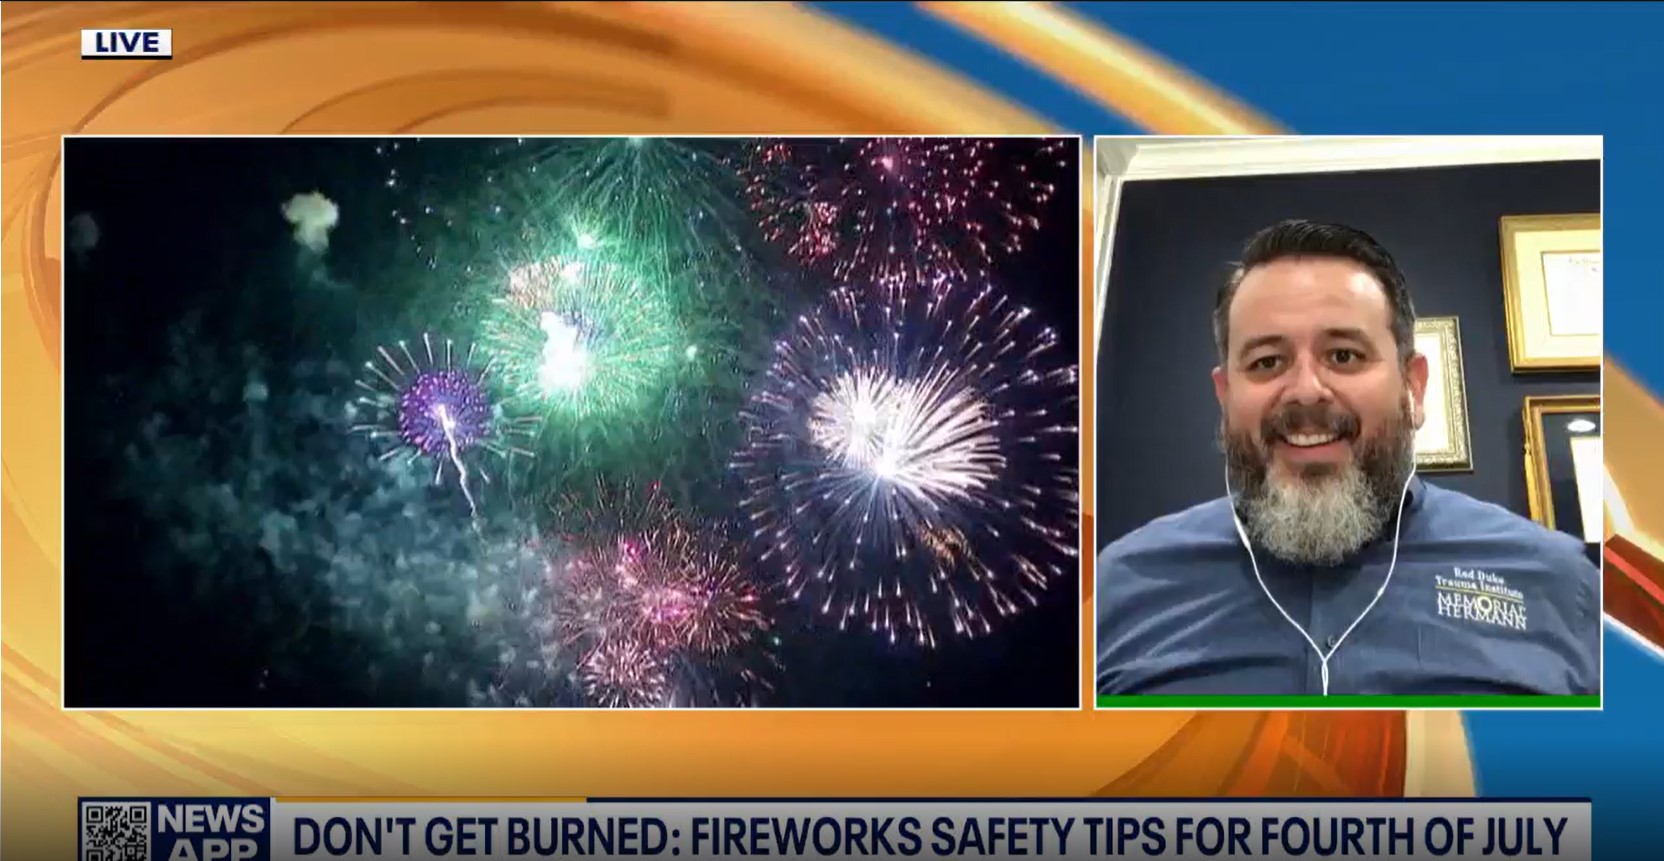 image from Drs Hilary Fairbrother and Samuel Prater – Firework Safety